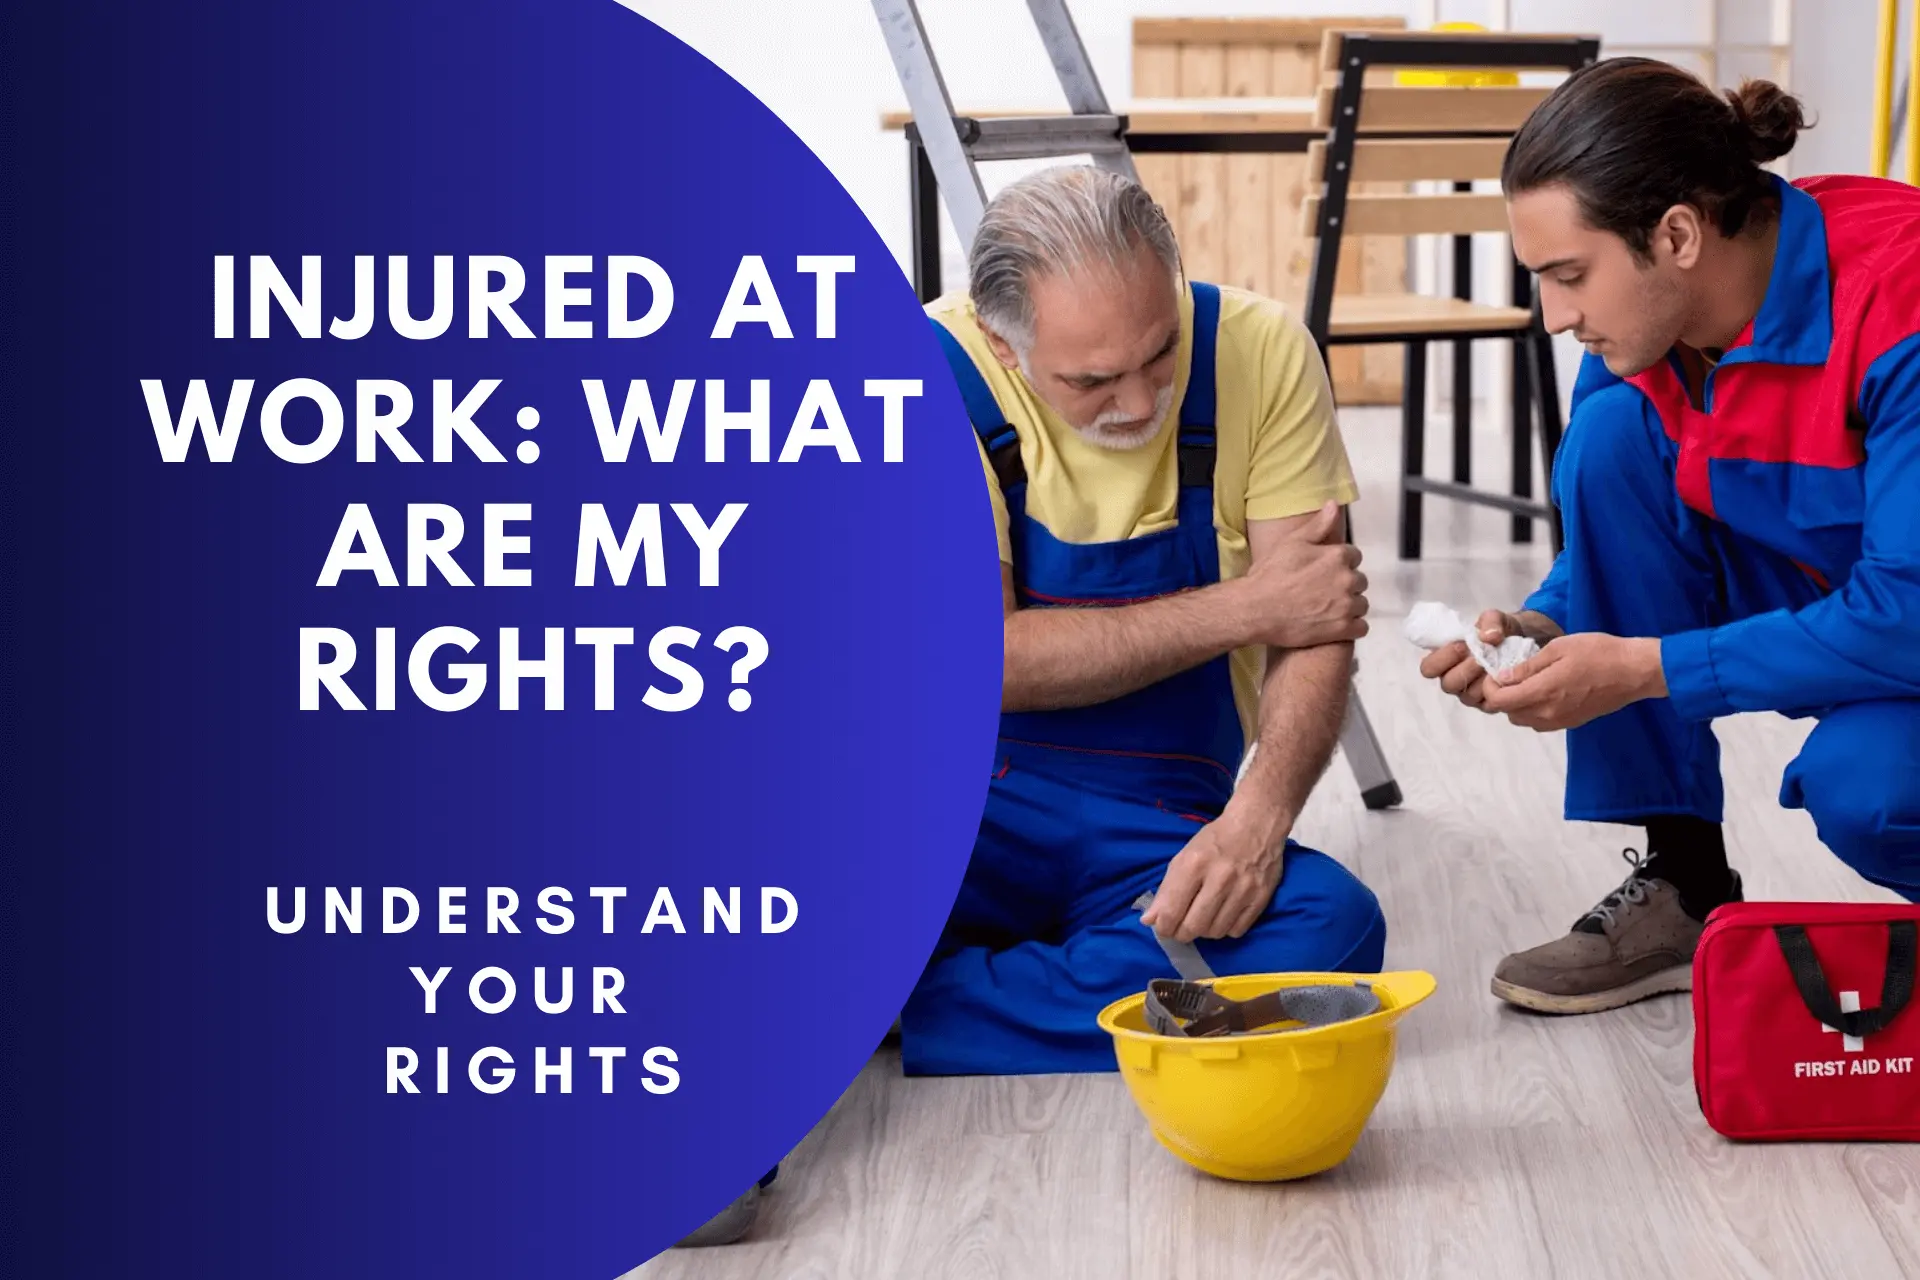 injured at work: what are my rights?